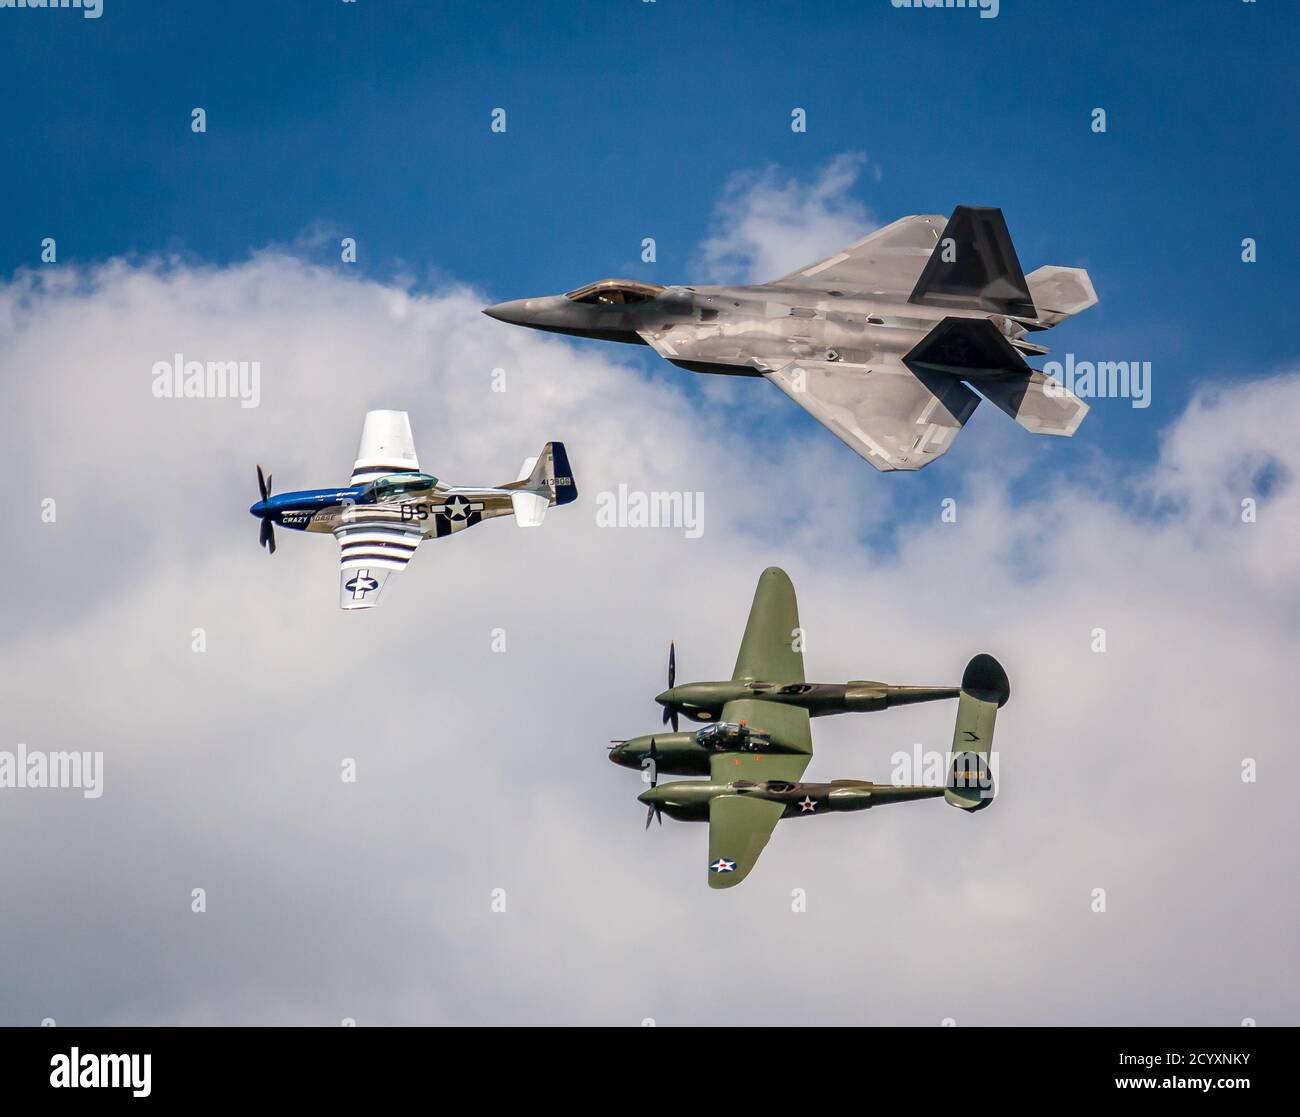 LAKELAND, FLORIDA, UNITED STATES - Apr 06, 2014: F22 Raptor, P51 Mustang and P38 Lightning at Sun N' Fun Air Show fly together the Sun and Fun Fly In Stock Photo